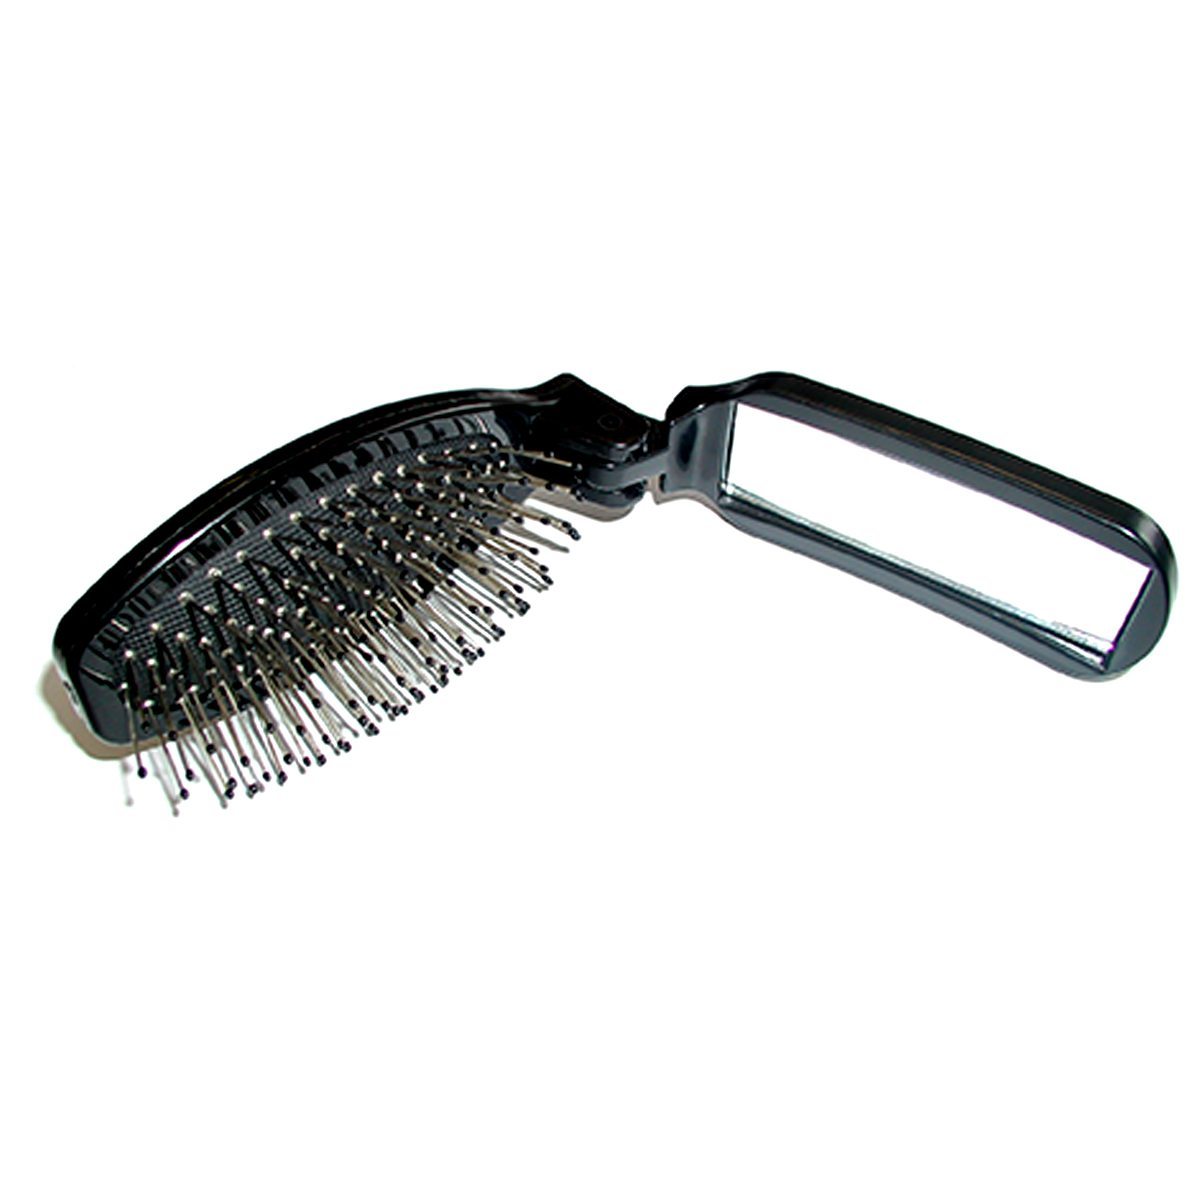 Dimples Pinhead Brush with Mirror - image Dimples-Pinhead-Brush-with-Mirror on https://purewigs.com